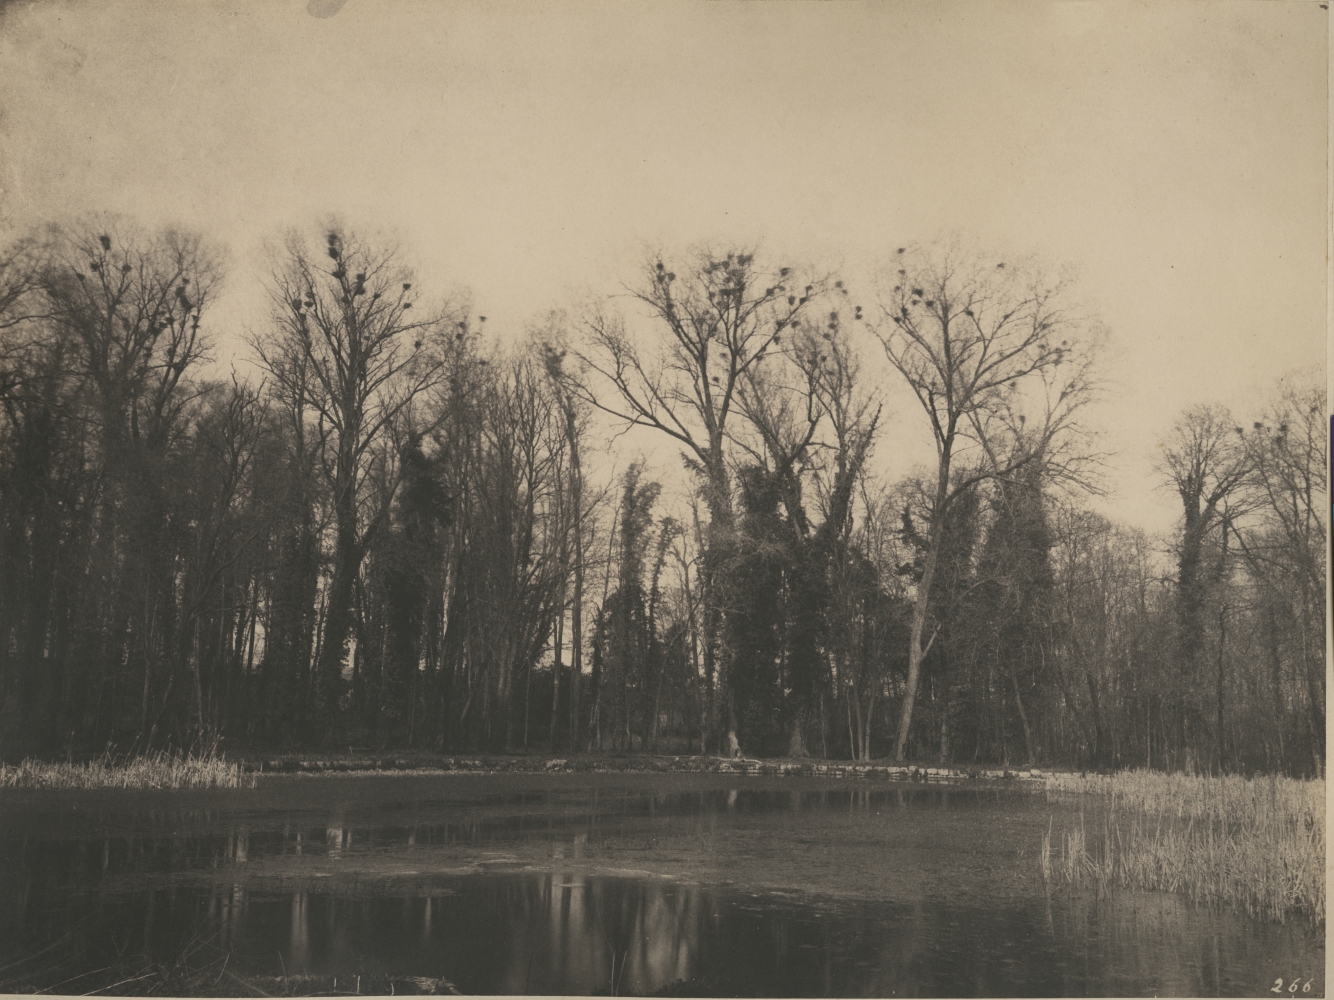 Eugène CUVELIER (French, 1837-1900) "Parc de Courances, nids de corbeaux", 1860s Salt print 25.4 x 33.6 cm, mounted Numbered "266" in the negative. Titled in pencil on mount.